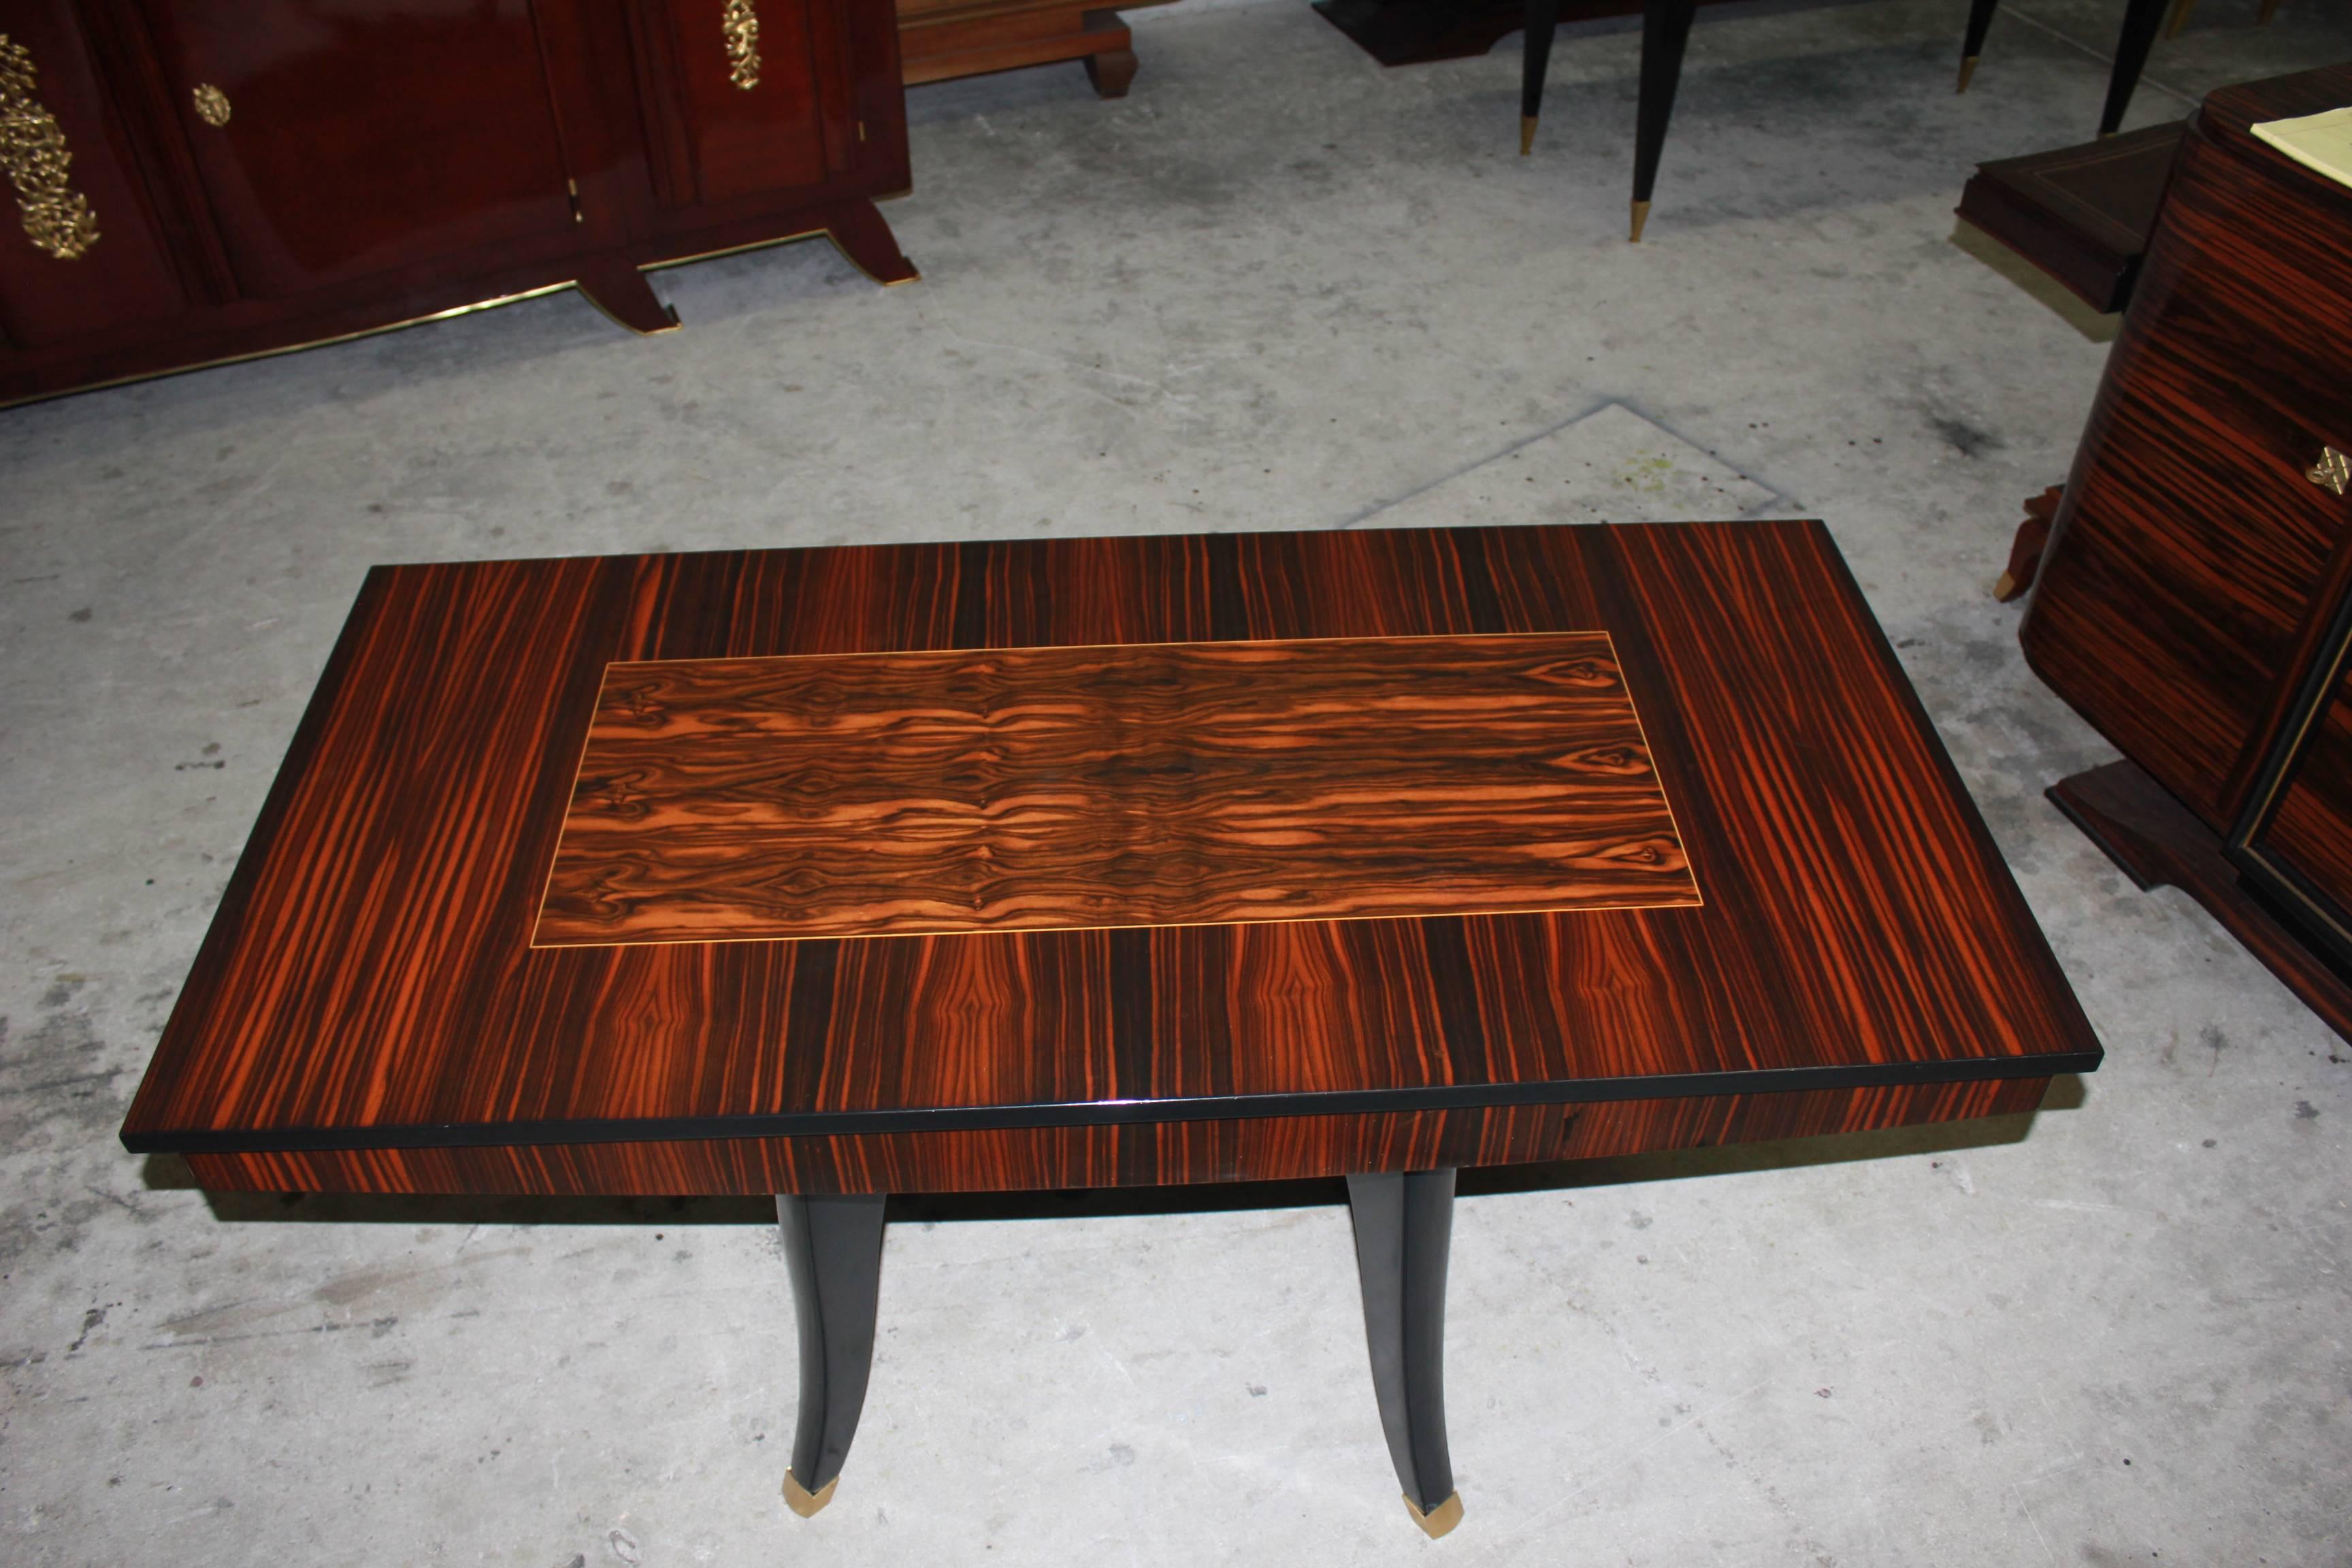 Beautiful French Art Deco exotic Macassar ebony rectangular centre table or dining table, circa 1940s. The table are in perfect condition, four Sabre legs ebony with bronze hardware detail, Macassar ebony top with centre inlay parquetry Macassar,